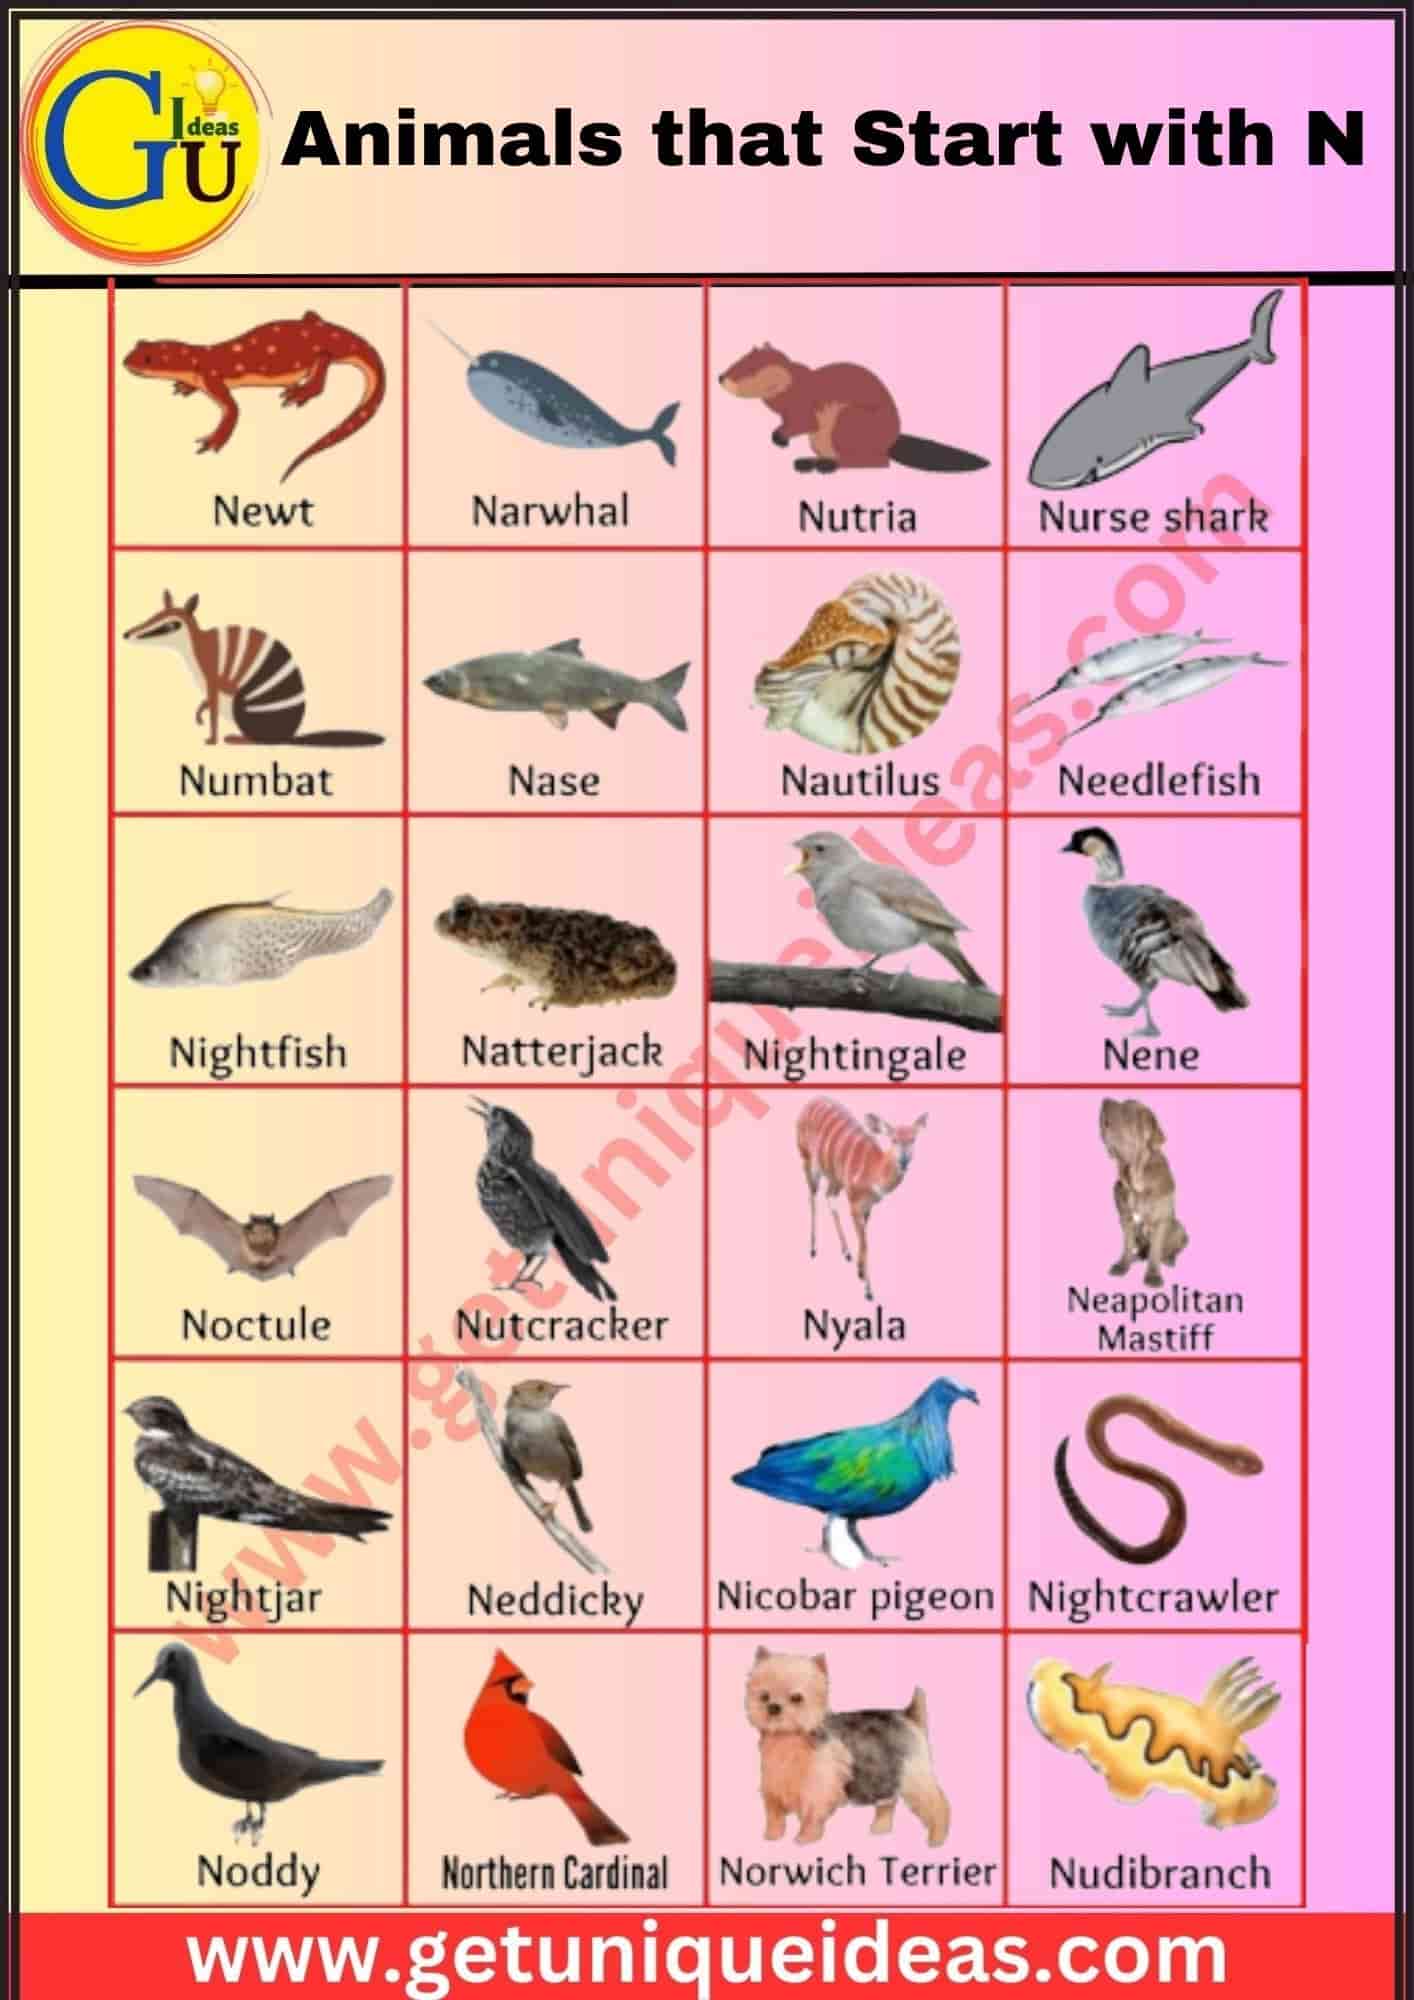 List of 100+ Animals that Start with N: Pictures, Facts - GetUniqueIdeas